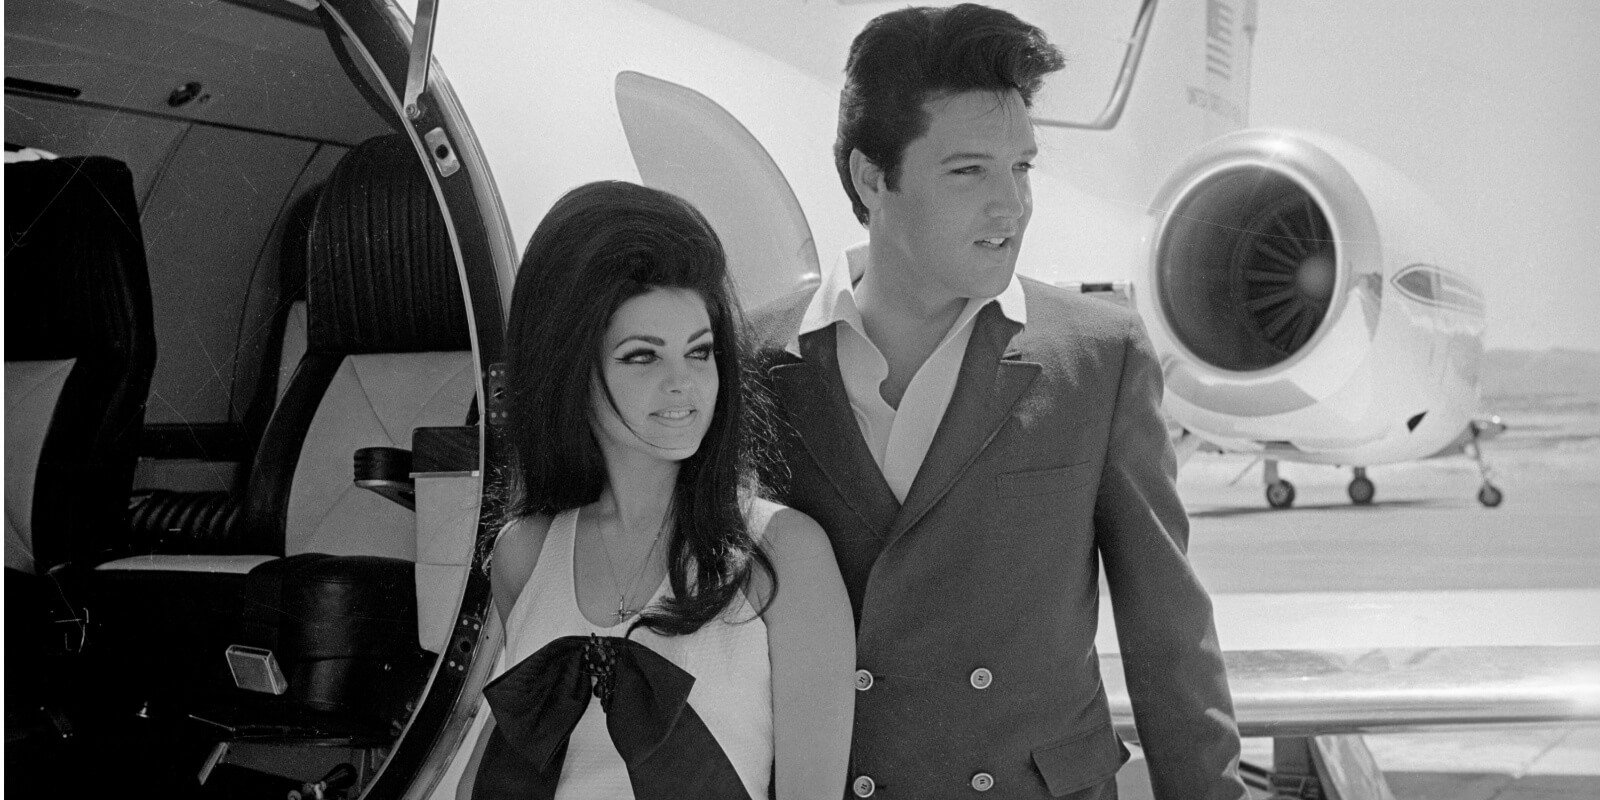 Priscilla and Elvis Presley were photographed following their wedding in 1967.